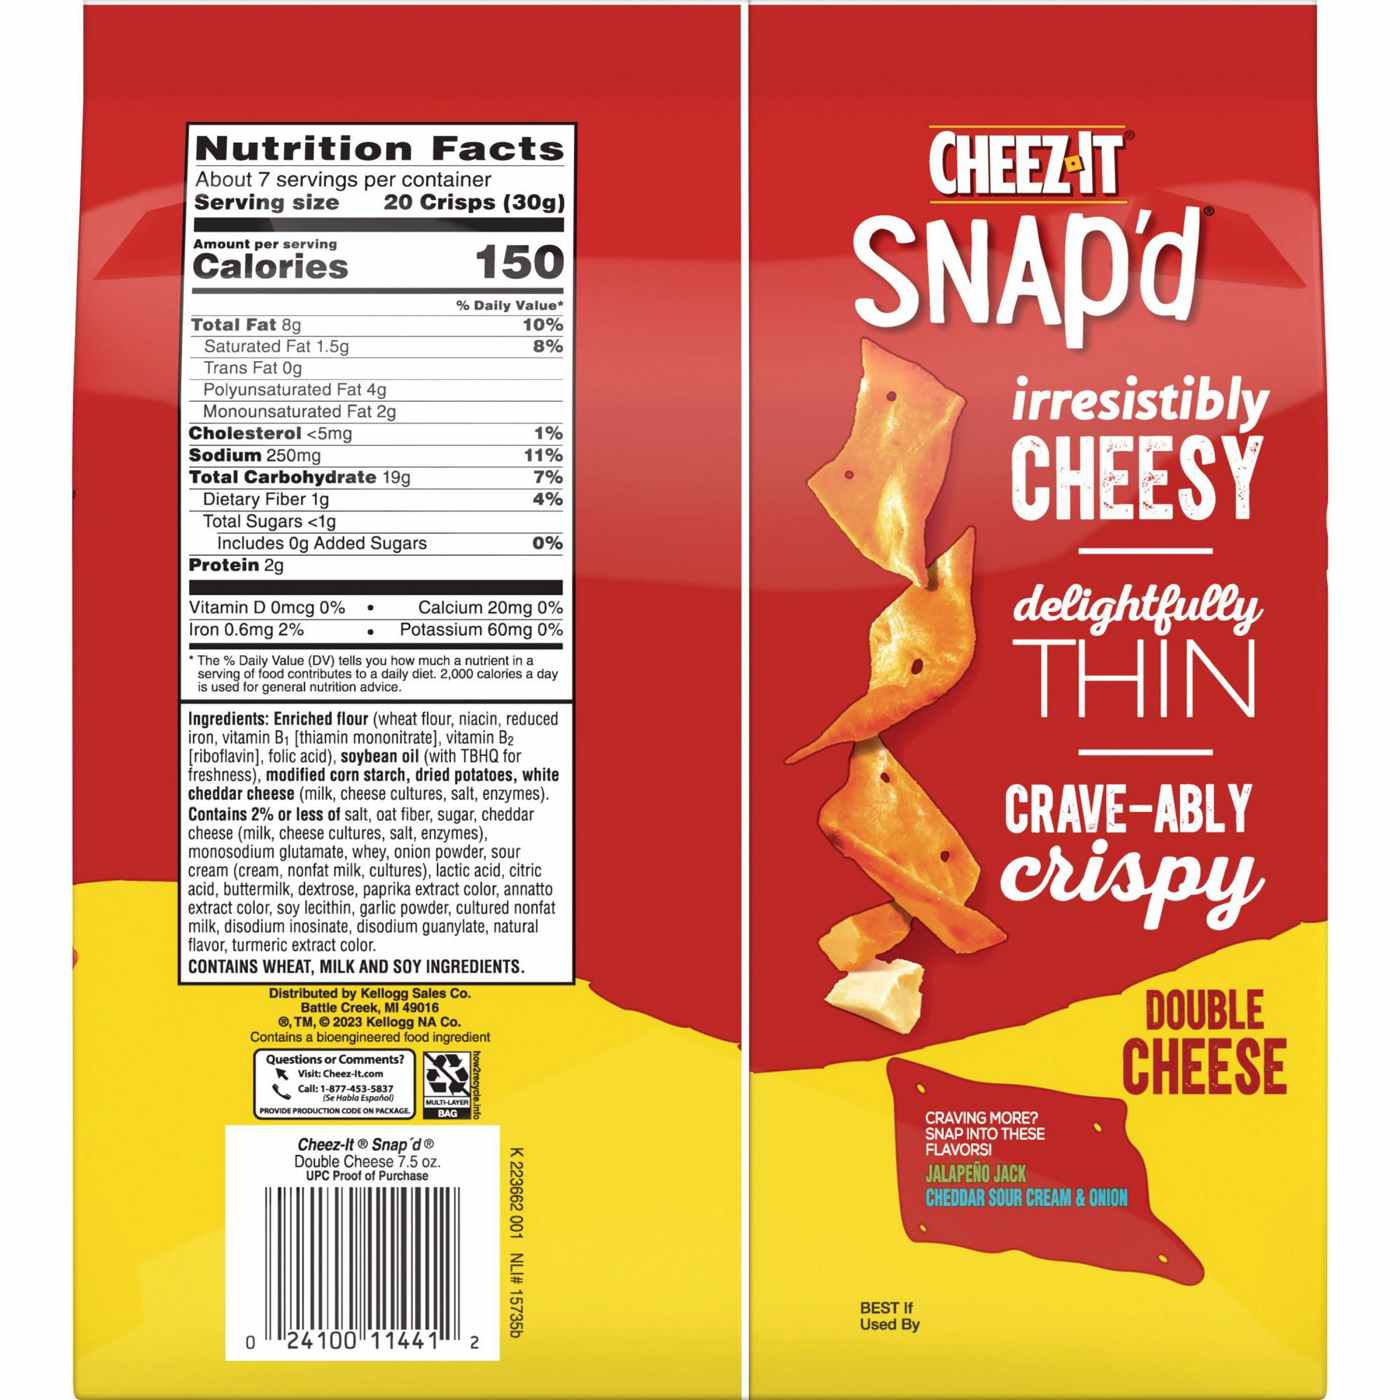 Cheez-It Snap'd Double Cheese Cracker Chips; image 2 of 6